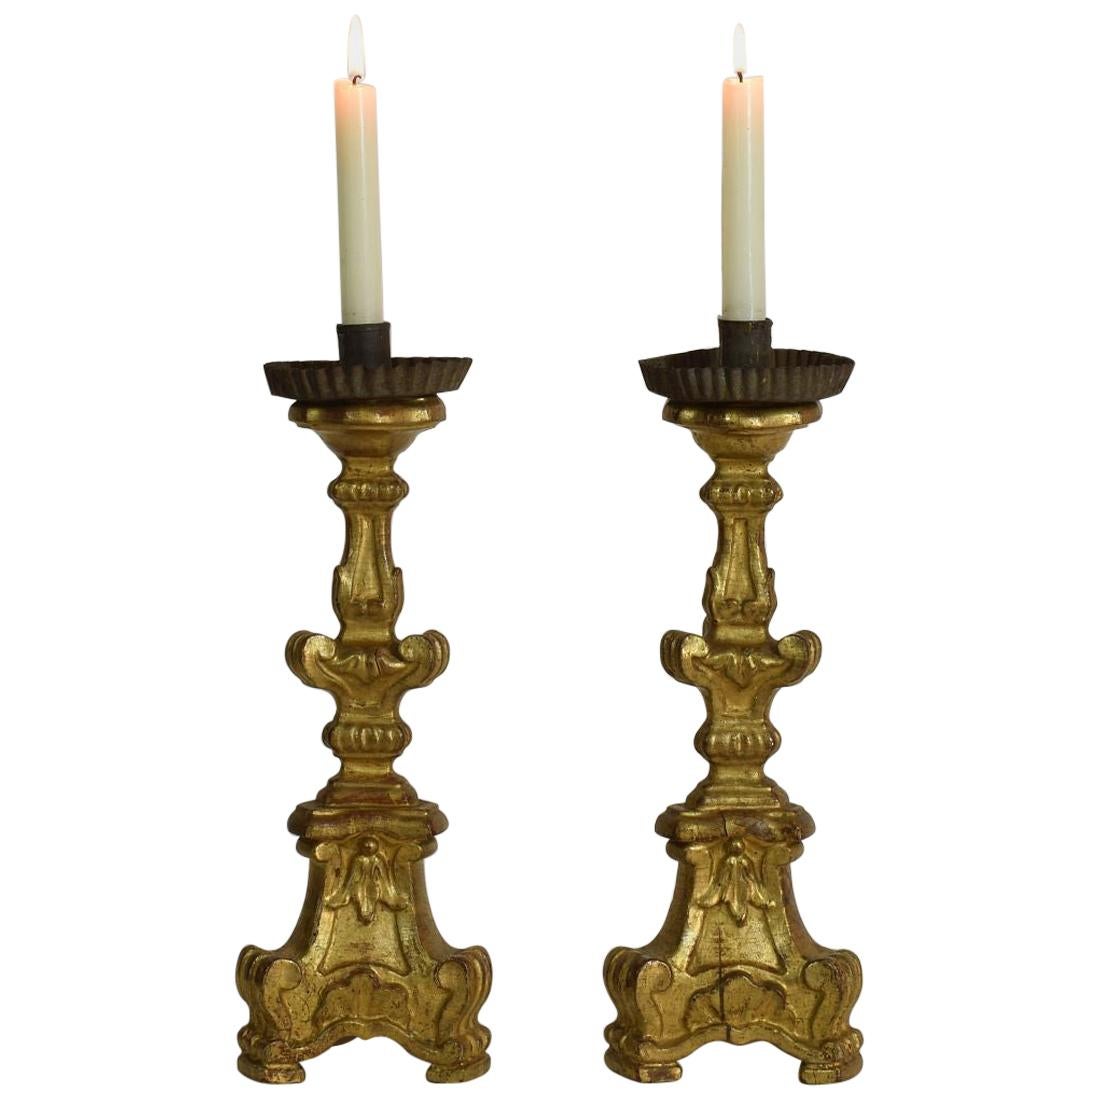 Pair of 18th Century Italian Giltwood Baroque Candlesticks or Candleholders